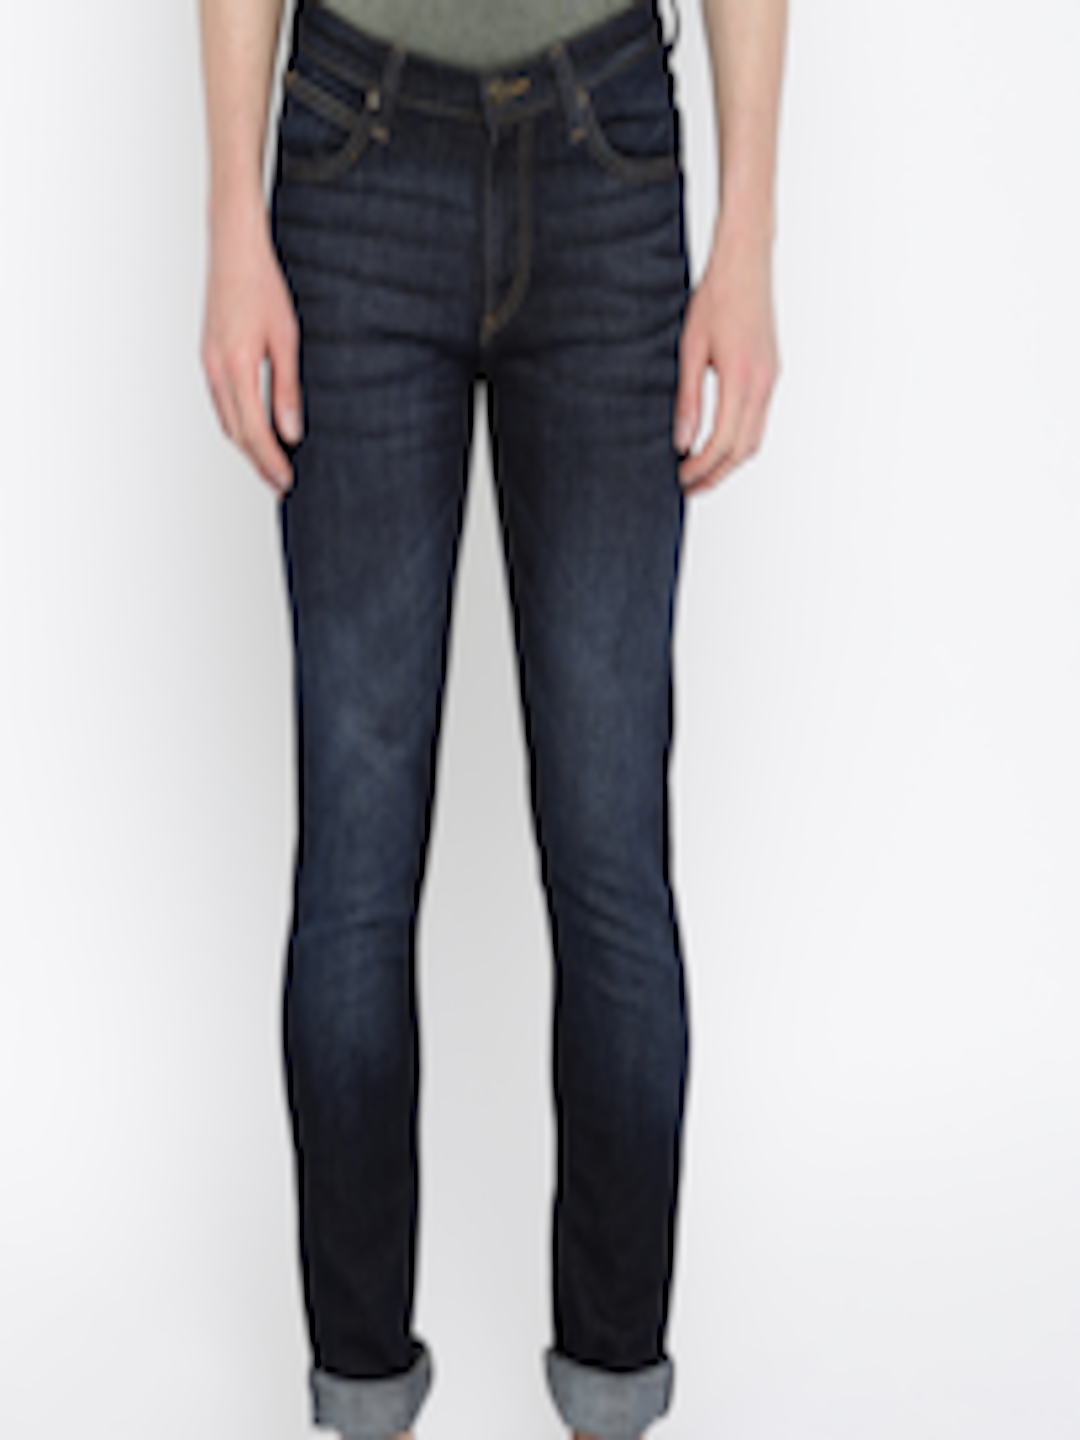 Buy Lee Navy Bruce Fit Stretchable Jeans - Jeans for Men 1864347 | Myntra